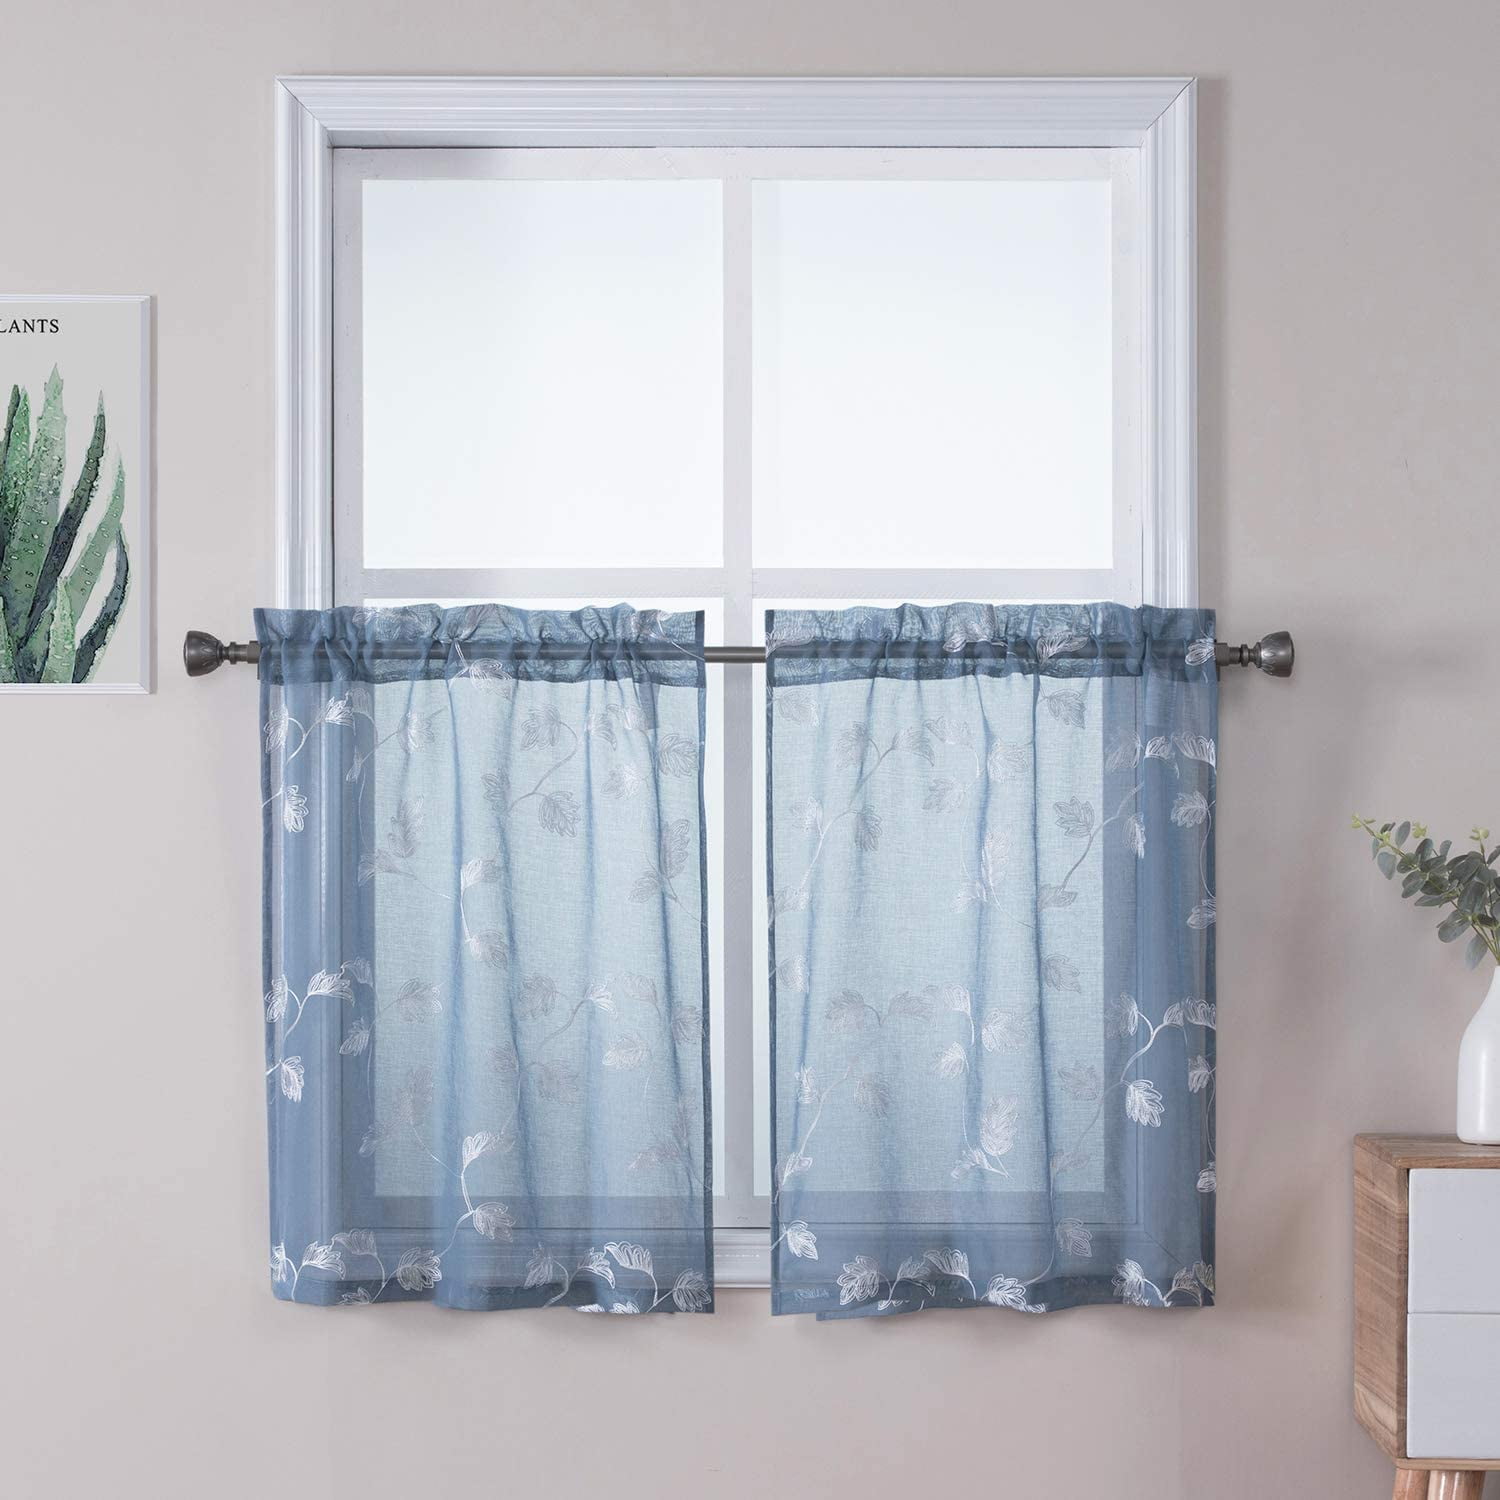 30*24, Dark Blue, Set of 2 Living Room LinTimes Waffle Weave Textured Tier Curtains Short Curtains Half Window Curtains Tier Curtains for Kitchen Bathroom 